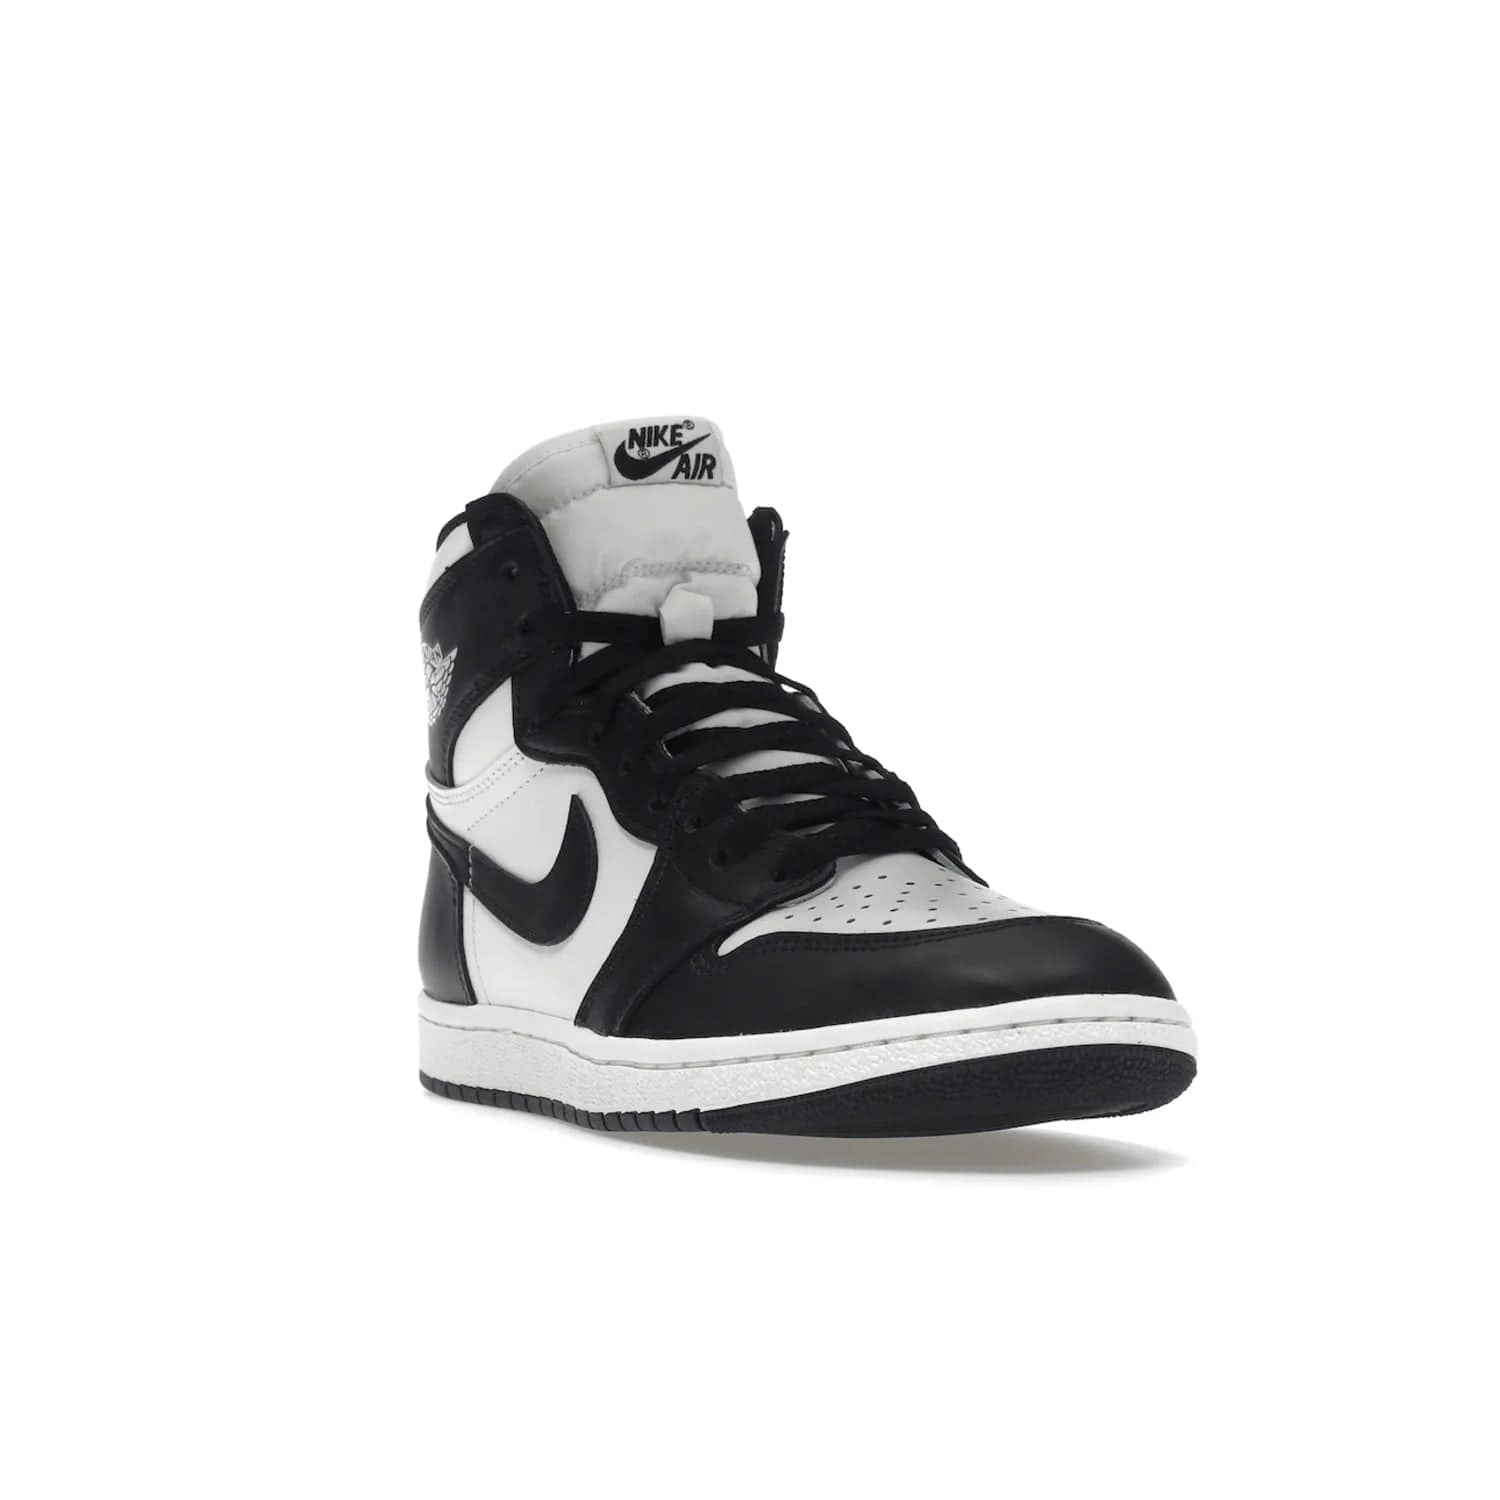 Jordan 1 Retro High 85 Black White (2023) - Image 7 - Only at www.BallersClubKickz.com - Brand new Jordan 1 Retro High 85 Black White (2023) now available. A classic color scheme of black and white leather uppers with signature Nike Air logo on the tongue. Must-have for any Air Jordan fan. Available February 15, 2023.